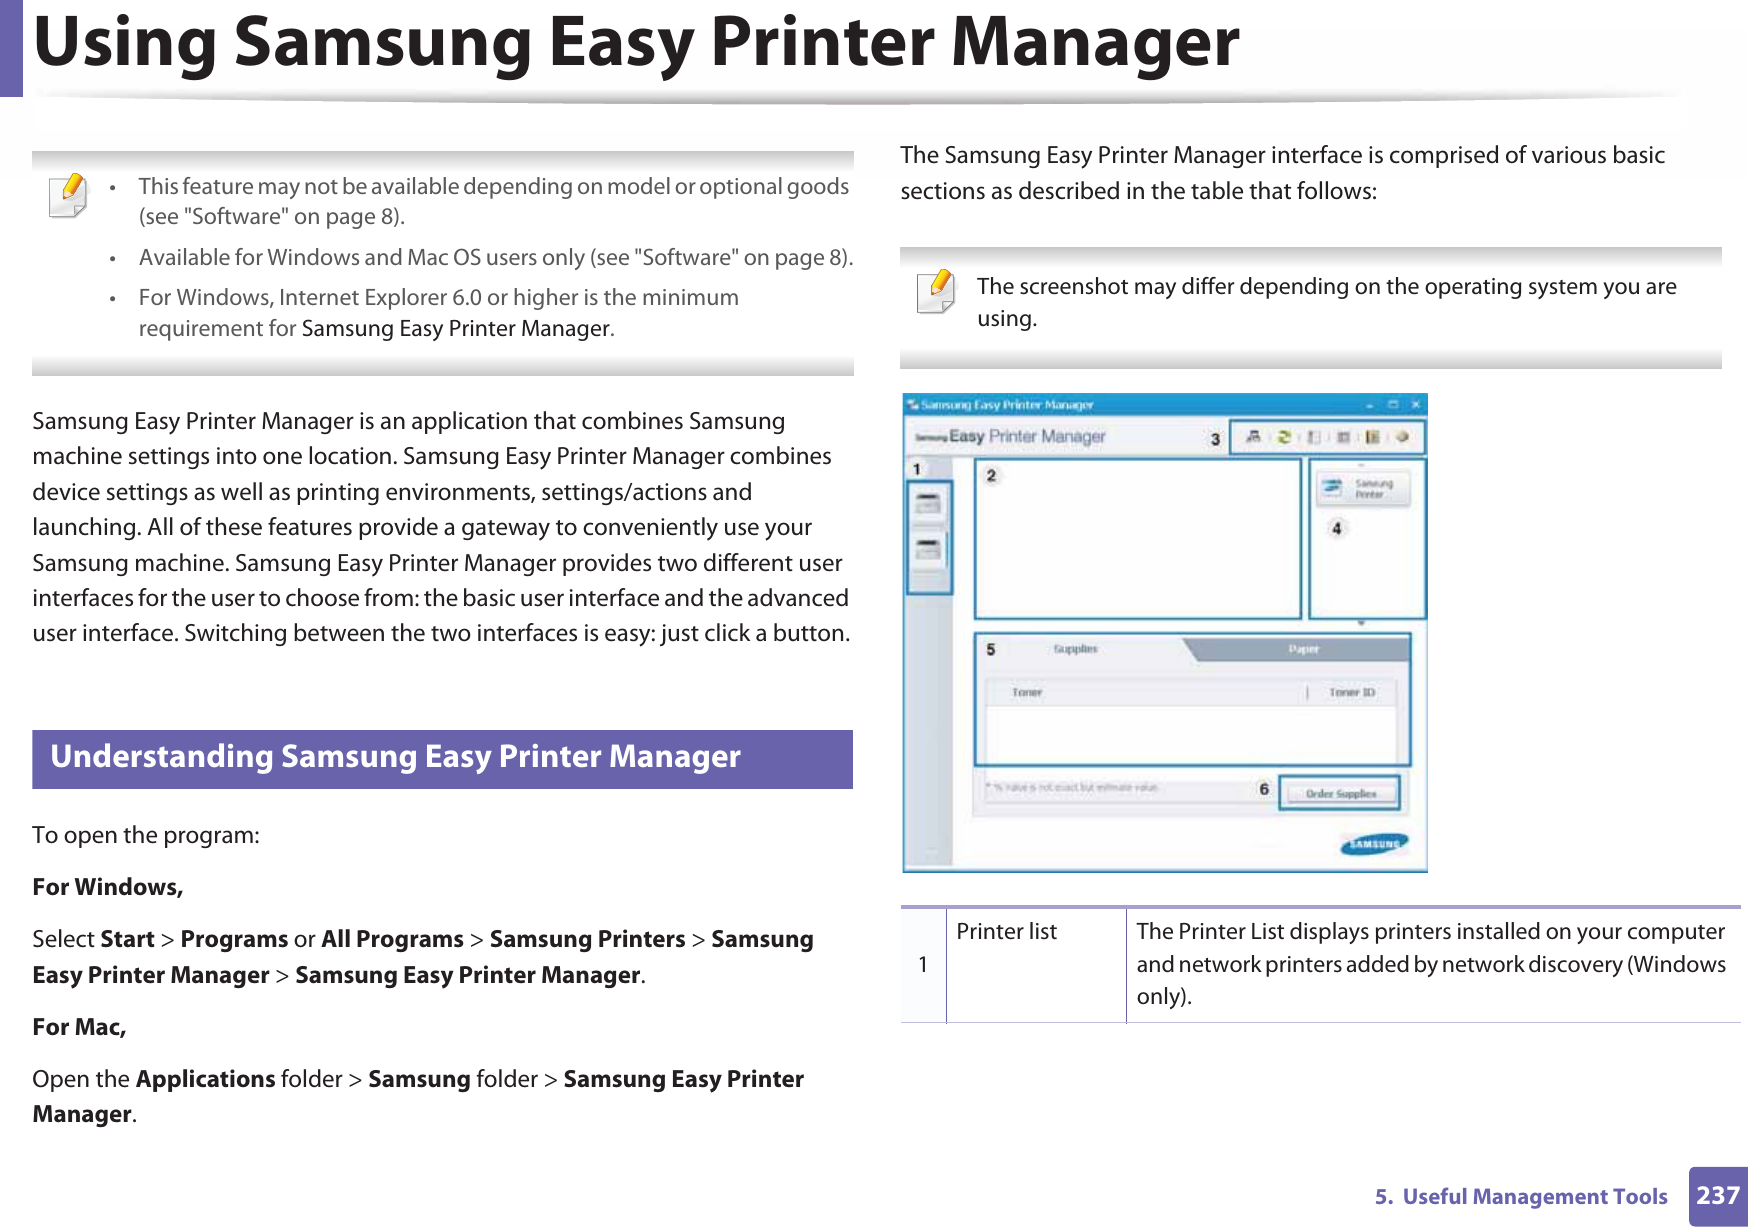 2375.  Useful Management ToolsUsing Samsung Easy Printer Manager  • This feature may not be available depending on model or optional goods (see &quot;Software&quot; on page 8).• Available for Windows and Mac OS users only (see &quot;Software&quot; on page 8).• For Windows, Internet Explorer 6.0 or higher is the minimum requirement for Samsung Easy Printer Manager. Samsung Easy Printer Manager is an application that combines Samsung machine settings into one location. Samsung Easy Printer Manager combines device settings as well as printing environments, settings/actions and launching. All of these features provide a gateway to conveniently use your Samsung machine. Samsung Easy Printer Manager provides two different user interfaces for the user to choose from: the basic user interface and the advanced user interface. Switching between the two interfaces is easy: just click a button.5 Understanding Samsung Easy Printer ManagerTo open the program: For Windows,Select Start &gt; Programs or All Programs &gt; Samsung Printers &gt; Samsung Easy Printer Manager &gt; Samsung Easy Printer Manager.For Mac,Open the Applications folder &gt; Samsung folder &gt; Samsung Easy Printer Manager.The Samsung Easy Printer Manager interface is comprised of various basic sections as described in the table that follows: The screenshot may differ depending on the operating system you are using. 1Printer list The Printer List displays printers installed on your computer and network printers added by network discovery (Windows only).